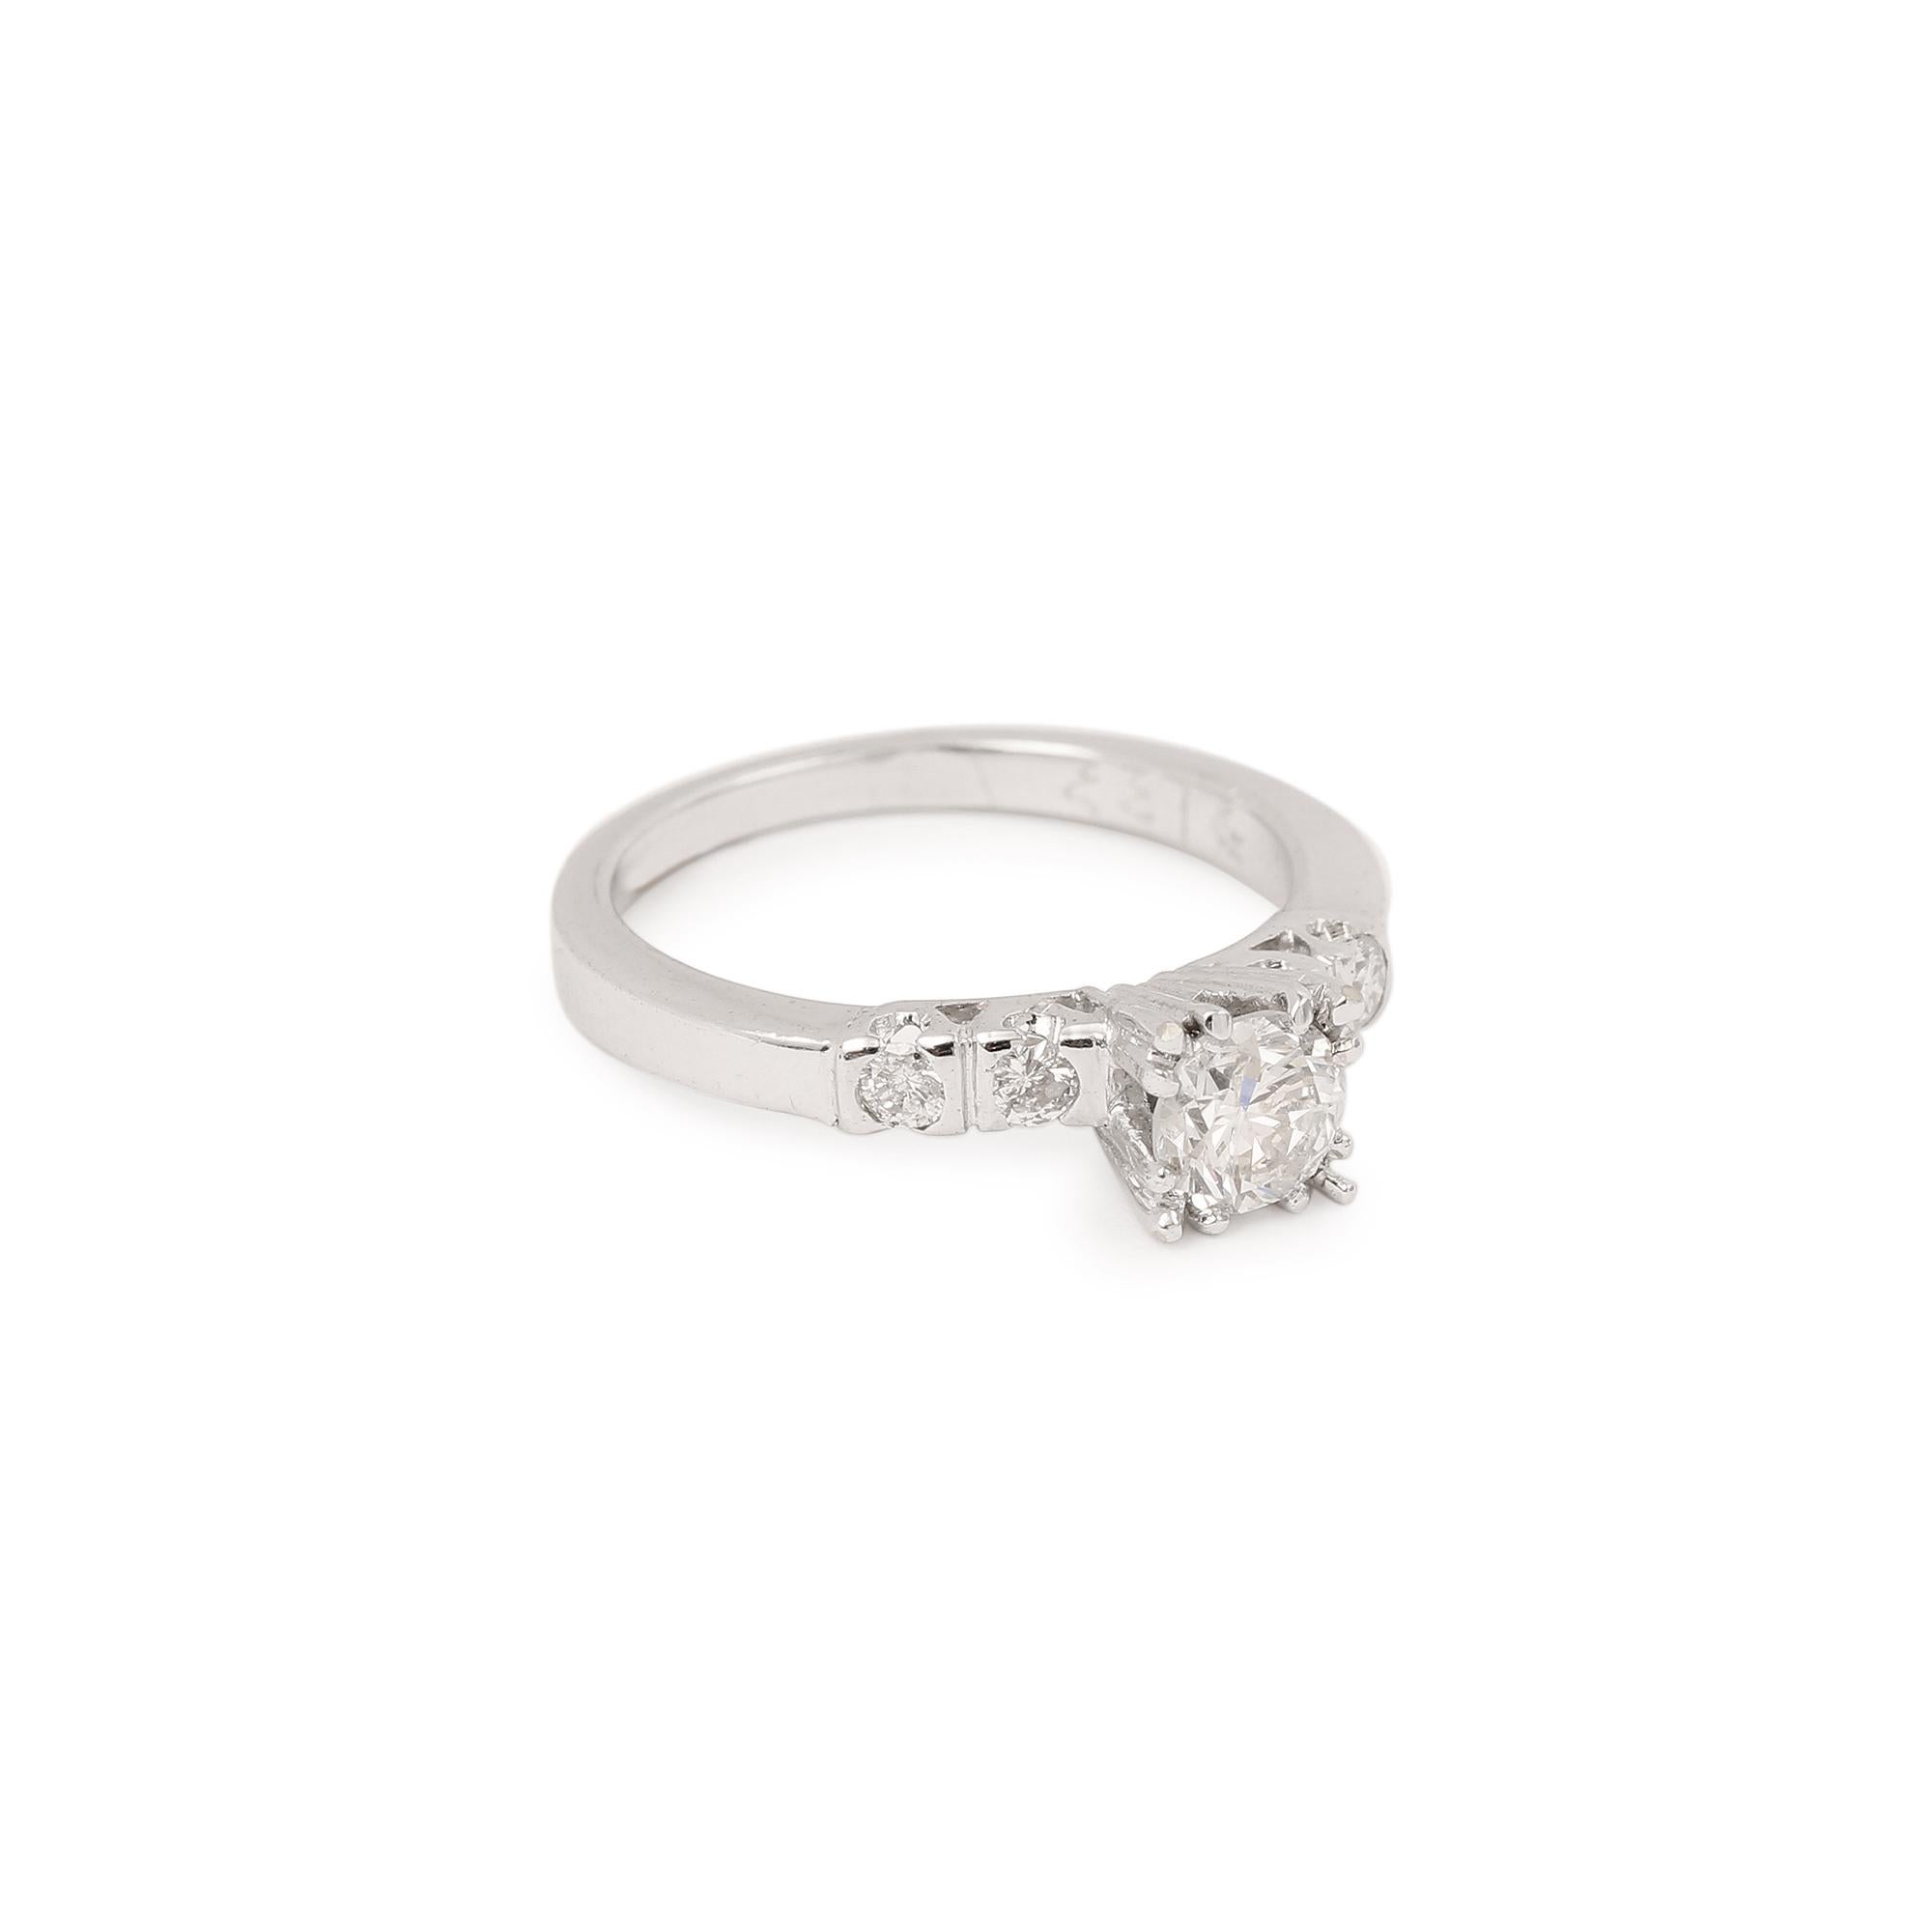 Elegant solitaire in white gold set with a central diamond and paved on both sides with 2 small diamonds

Estimated weight of the central diamond : 0.55 carats

Estimated color: H/I

Estimated clarity: P1

Total estimated weight of the pavement: